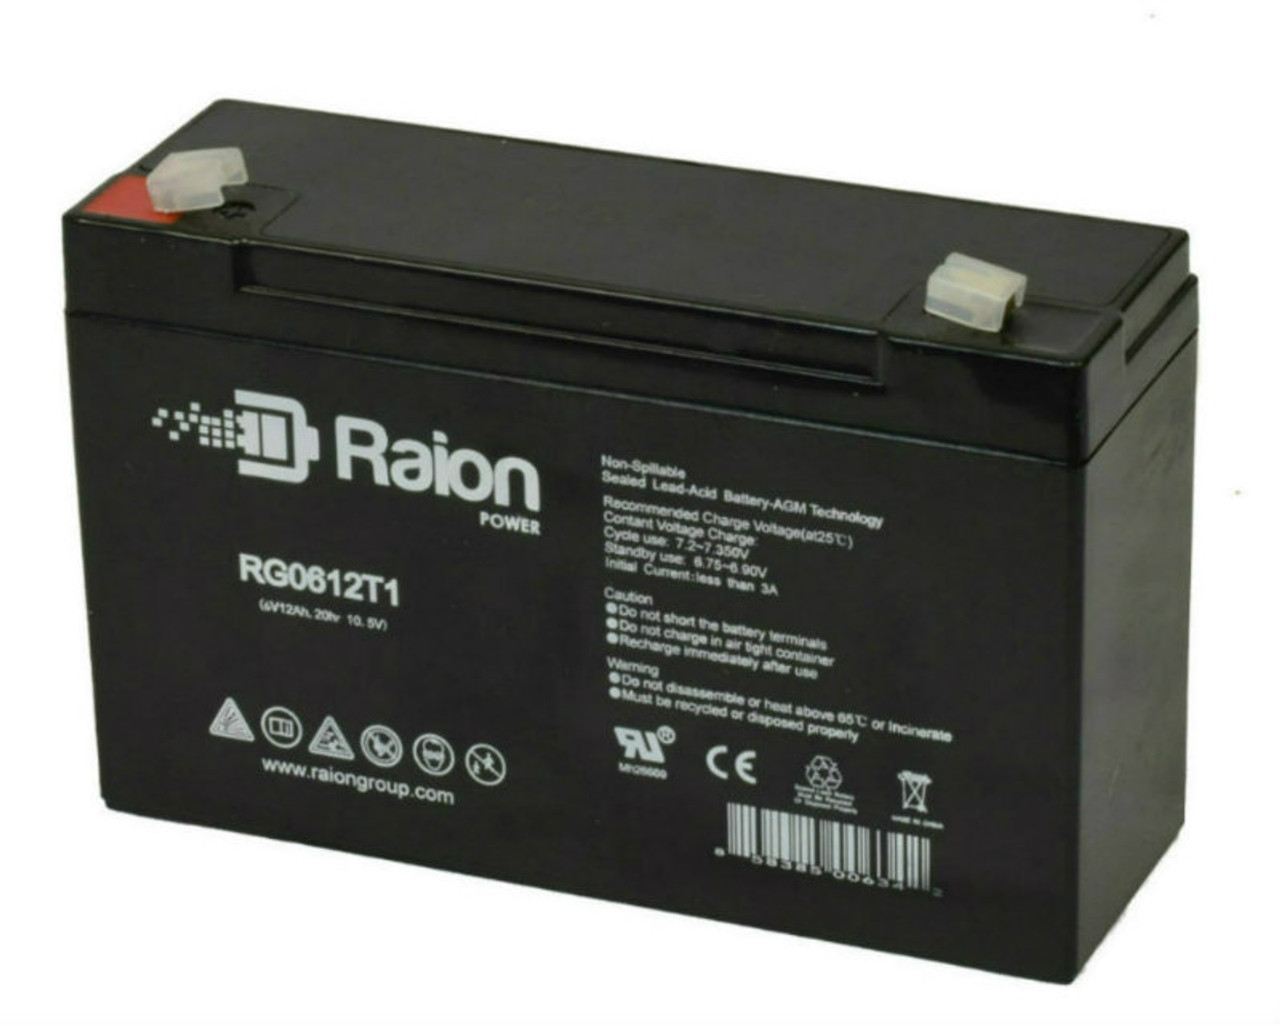 Raion Power RG06120T1 Replacement Battery for CSB Battery GP6120-F1